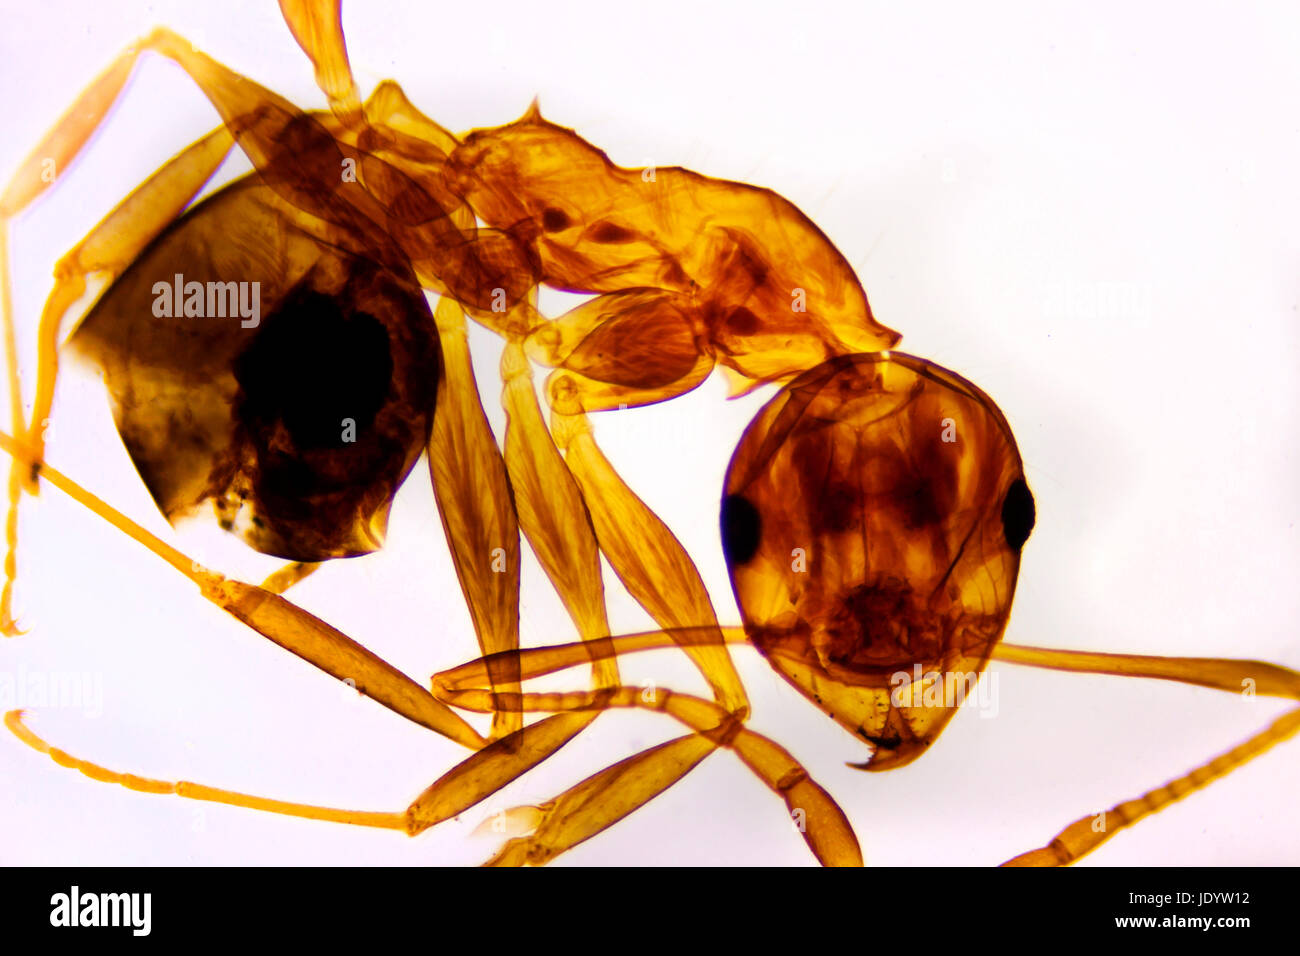 Micro Photo of an Ant Stock Photo